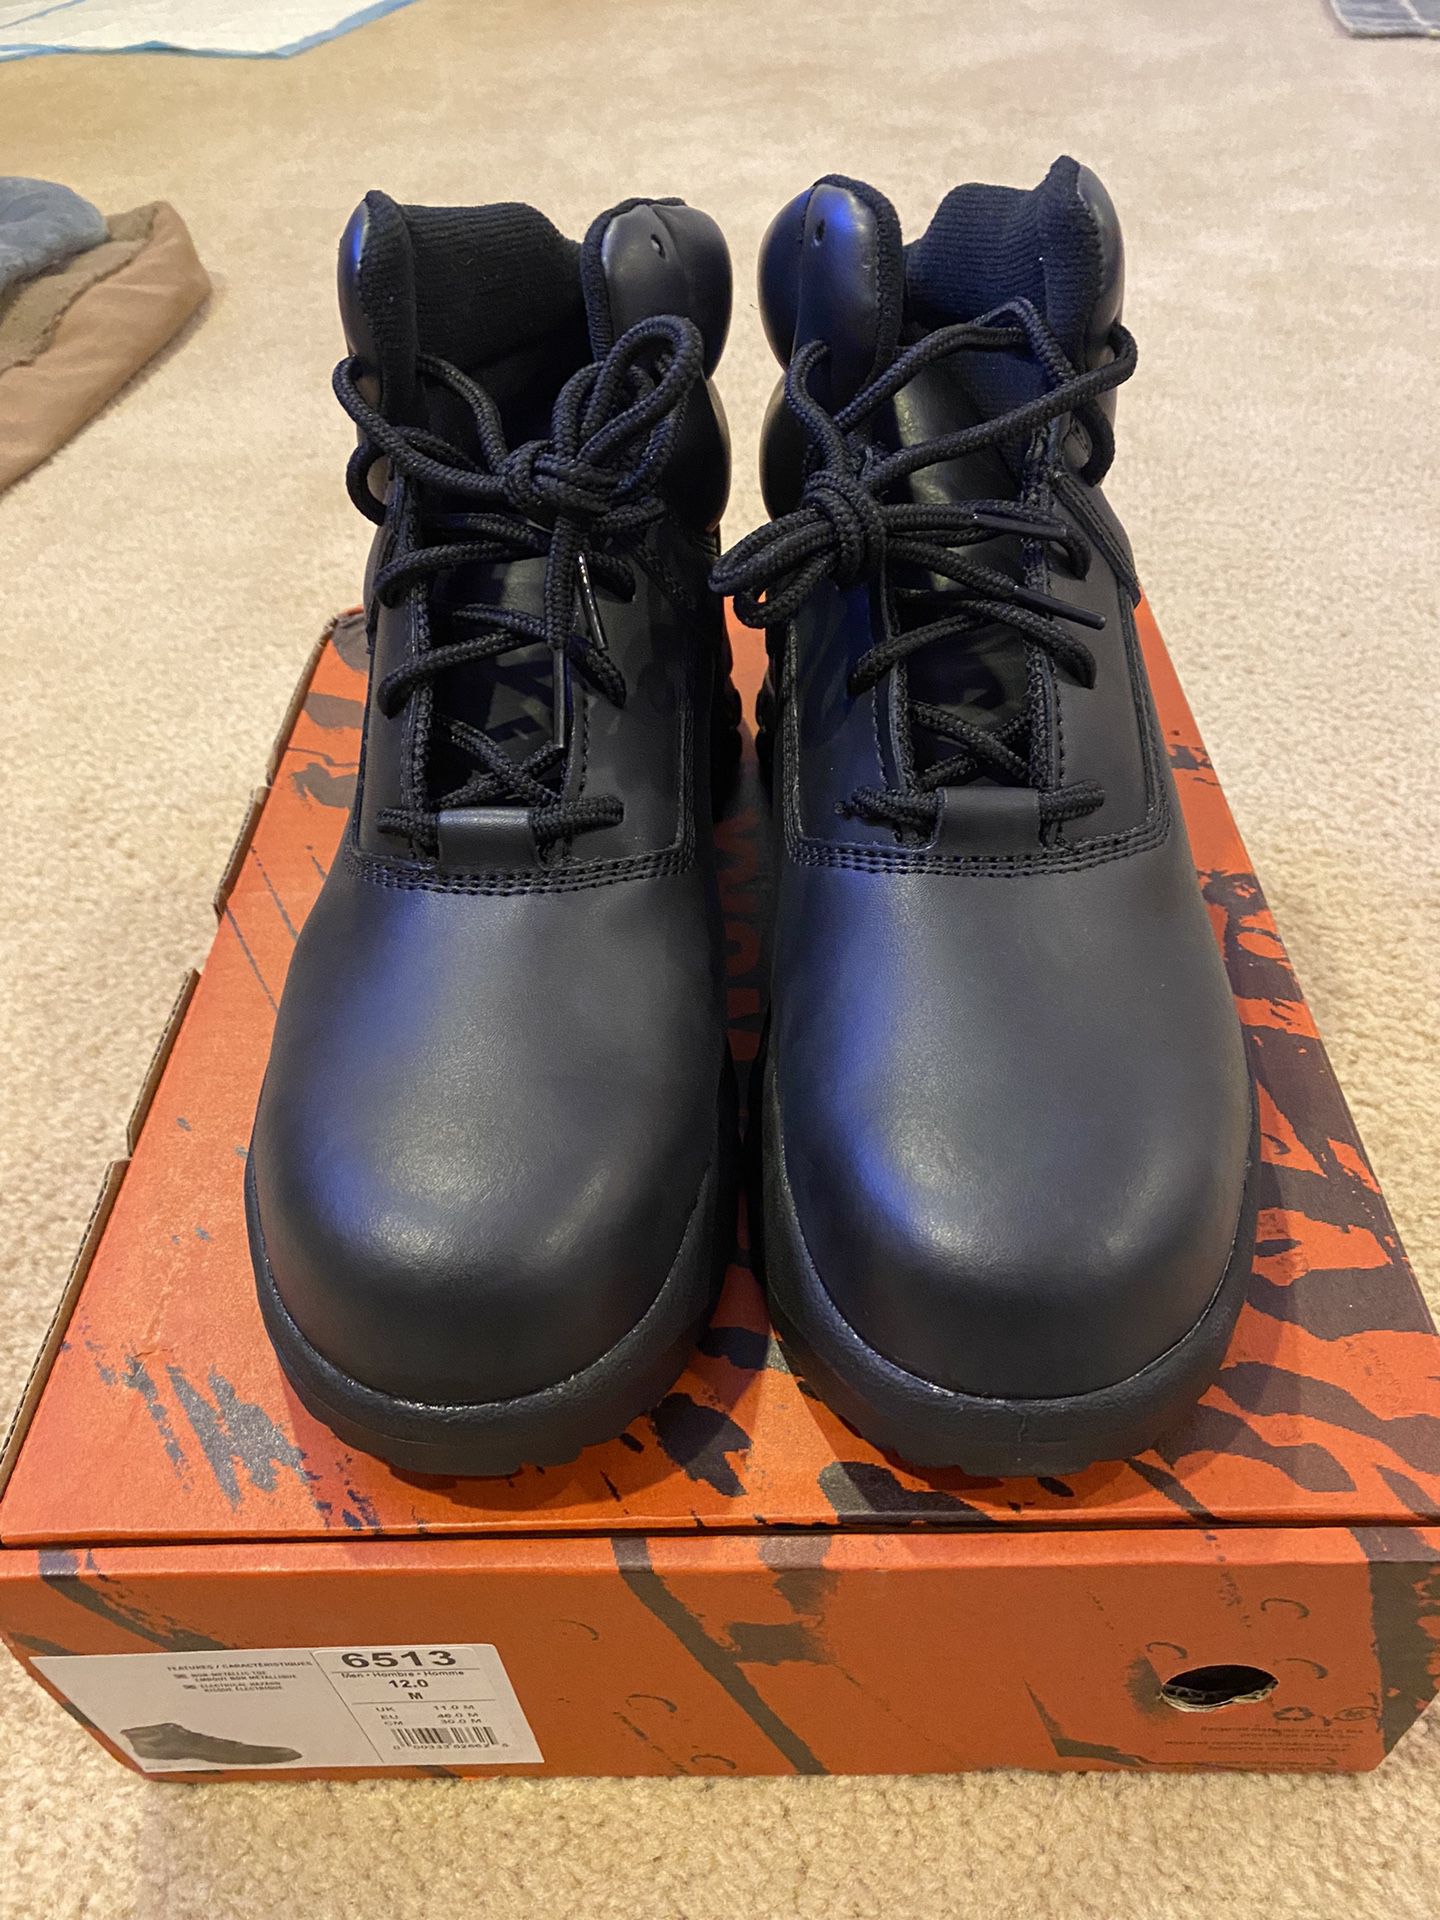 Brand New Men’s Work Boots, Size 12